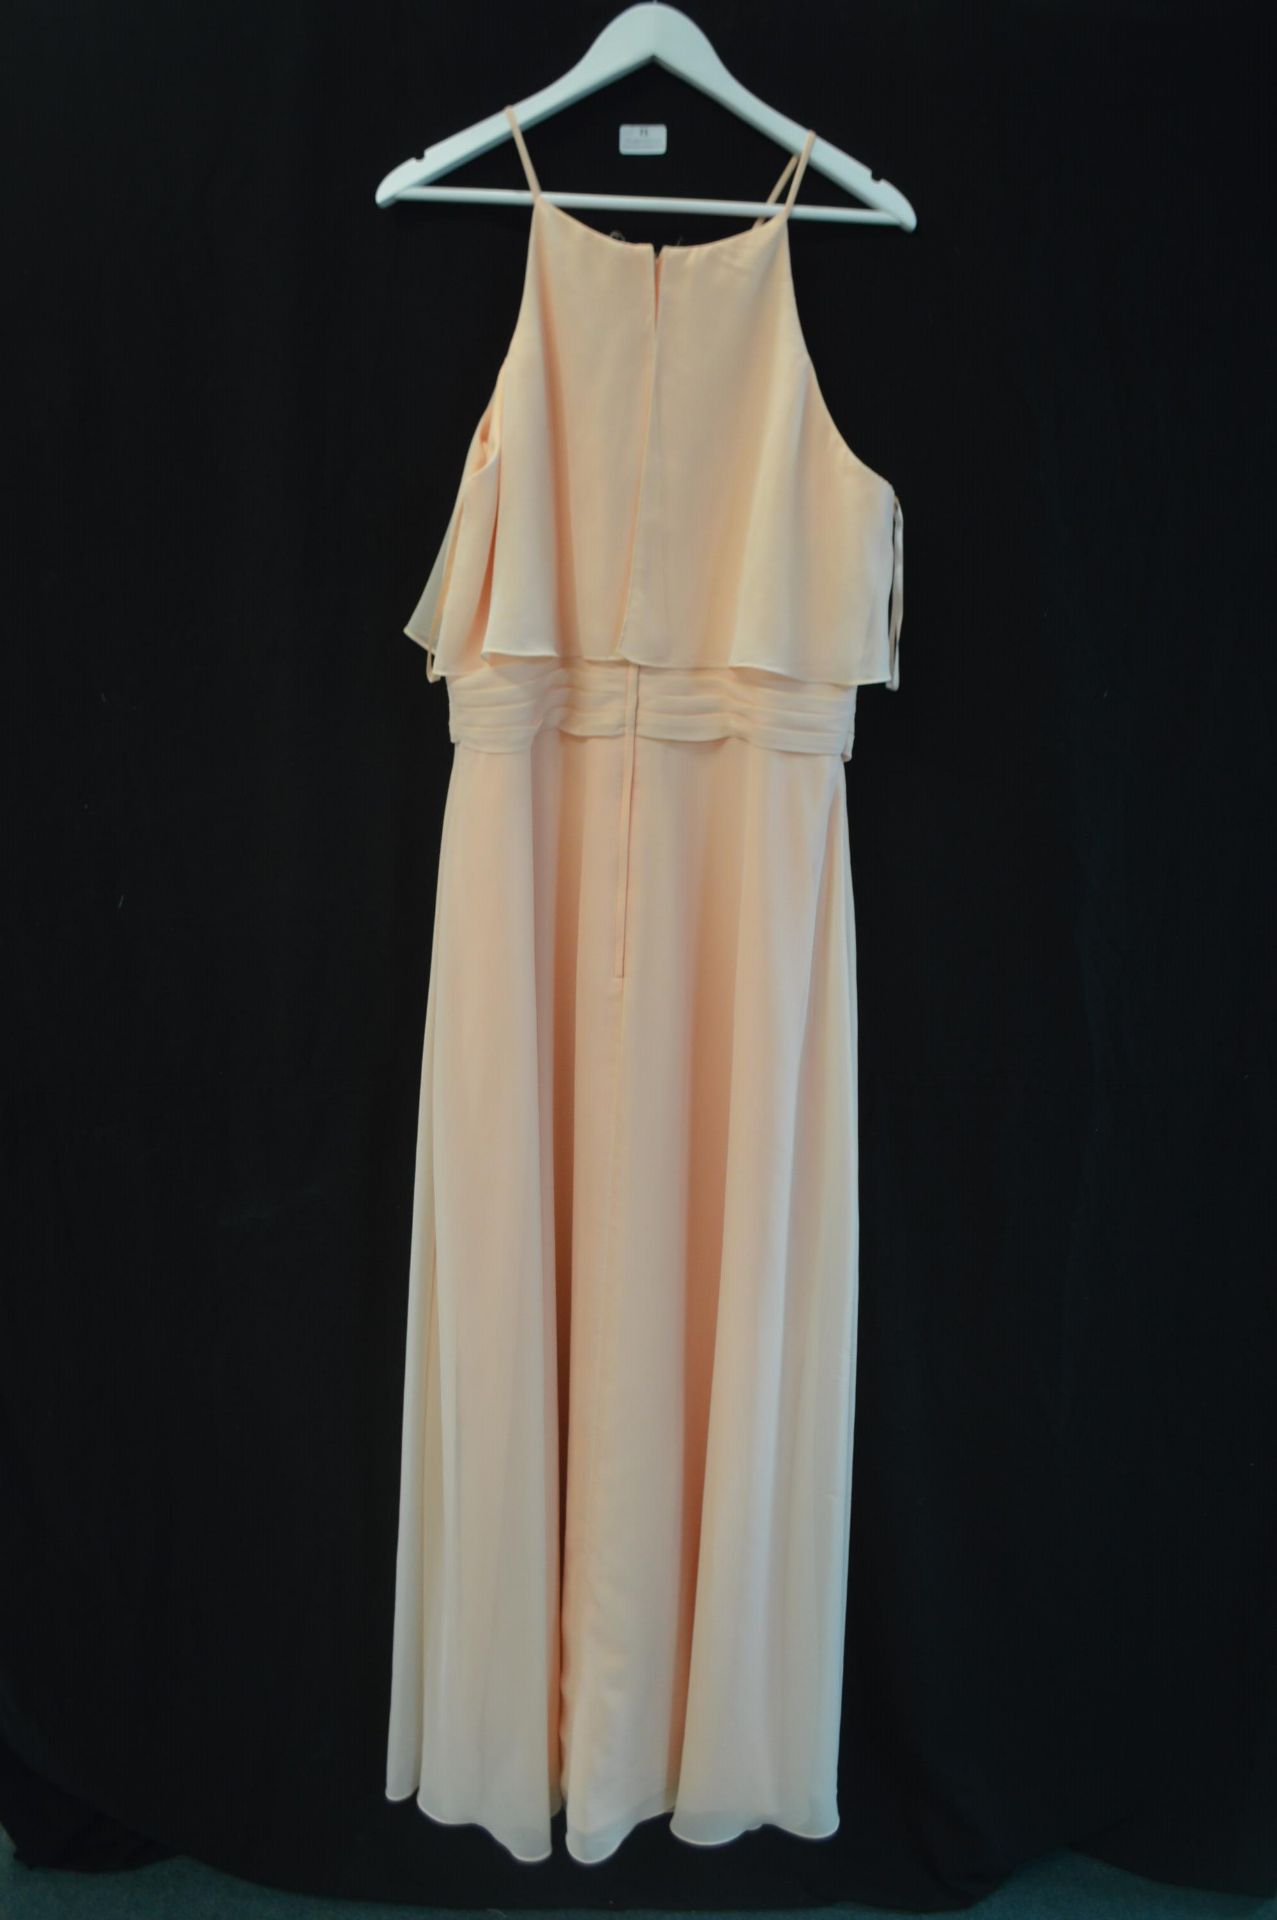 Prom Dress in Creamy Peach by Kenneth Winston Size: 18 - Image 2 of 2